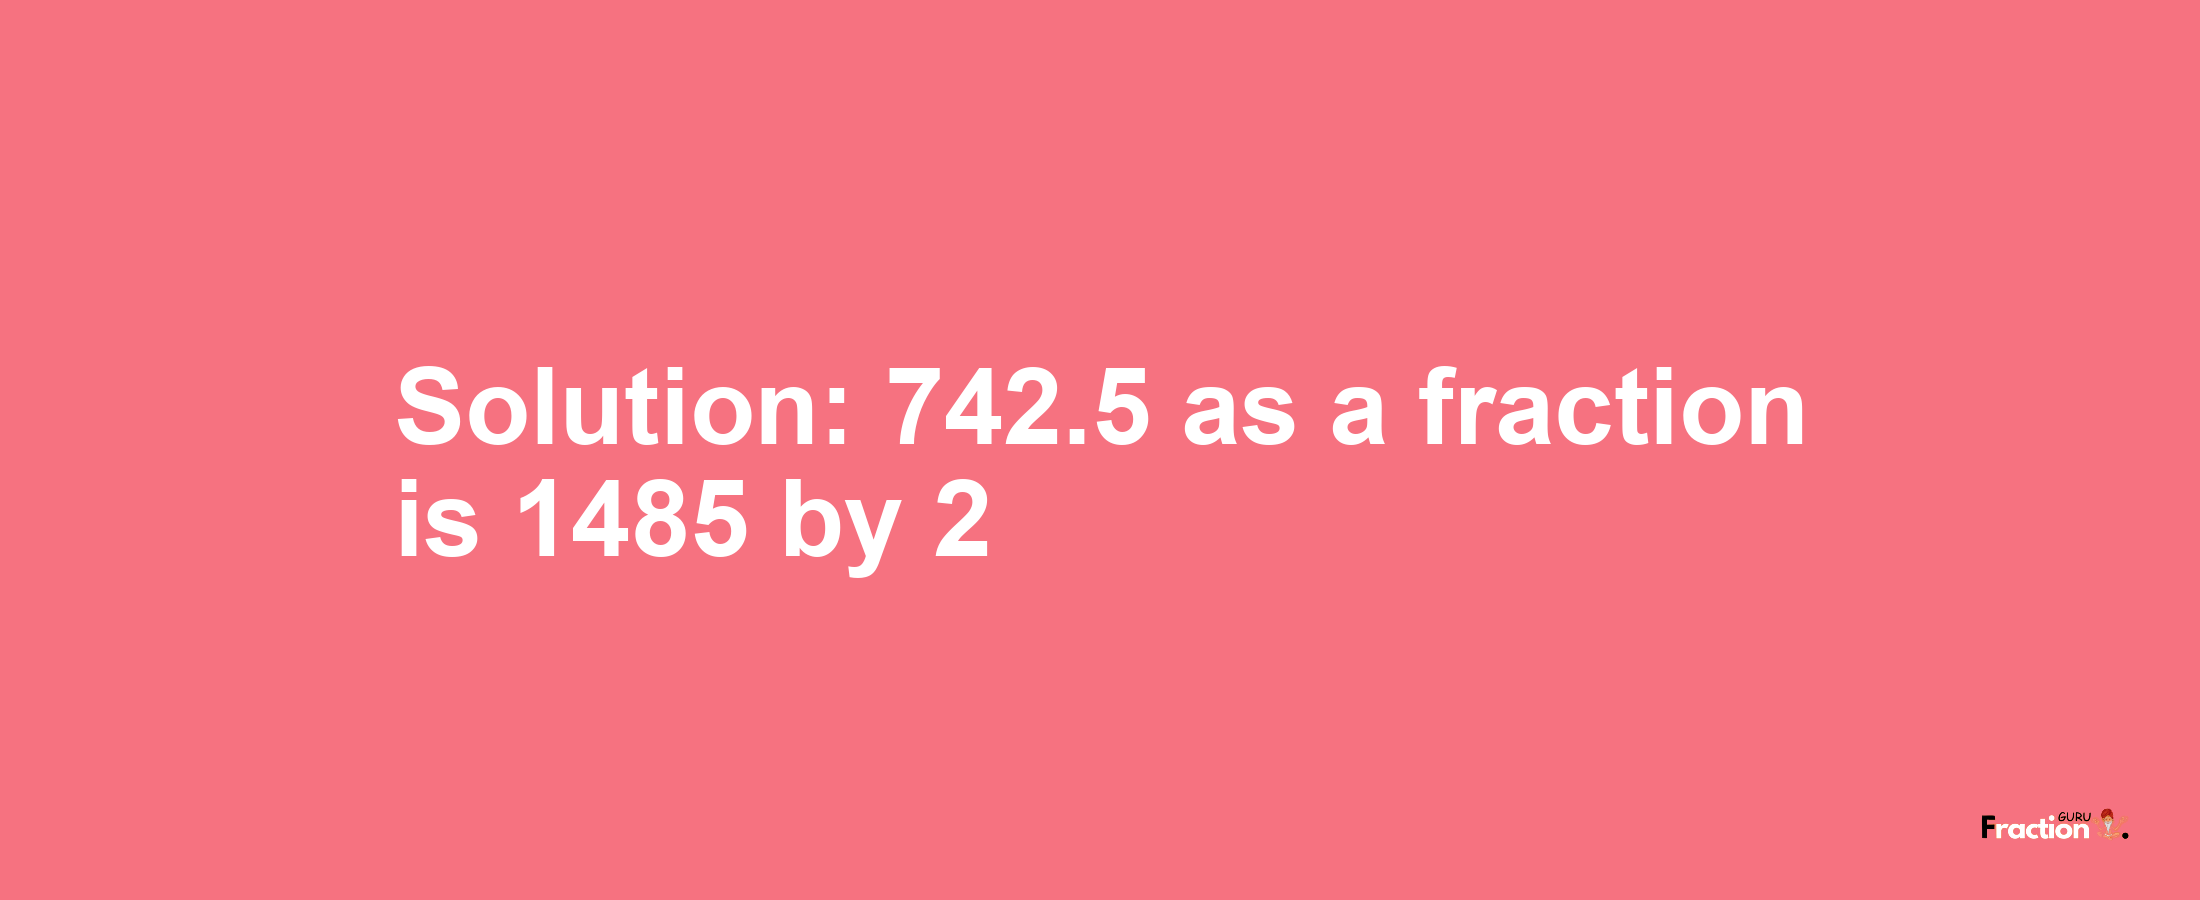 Solution:742.5 as a fraction is 1485/2